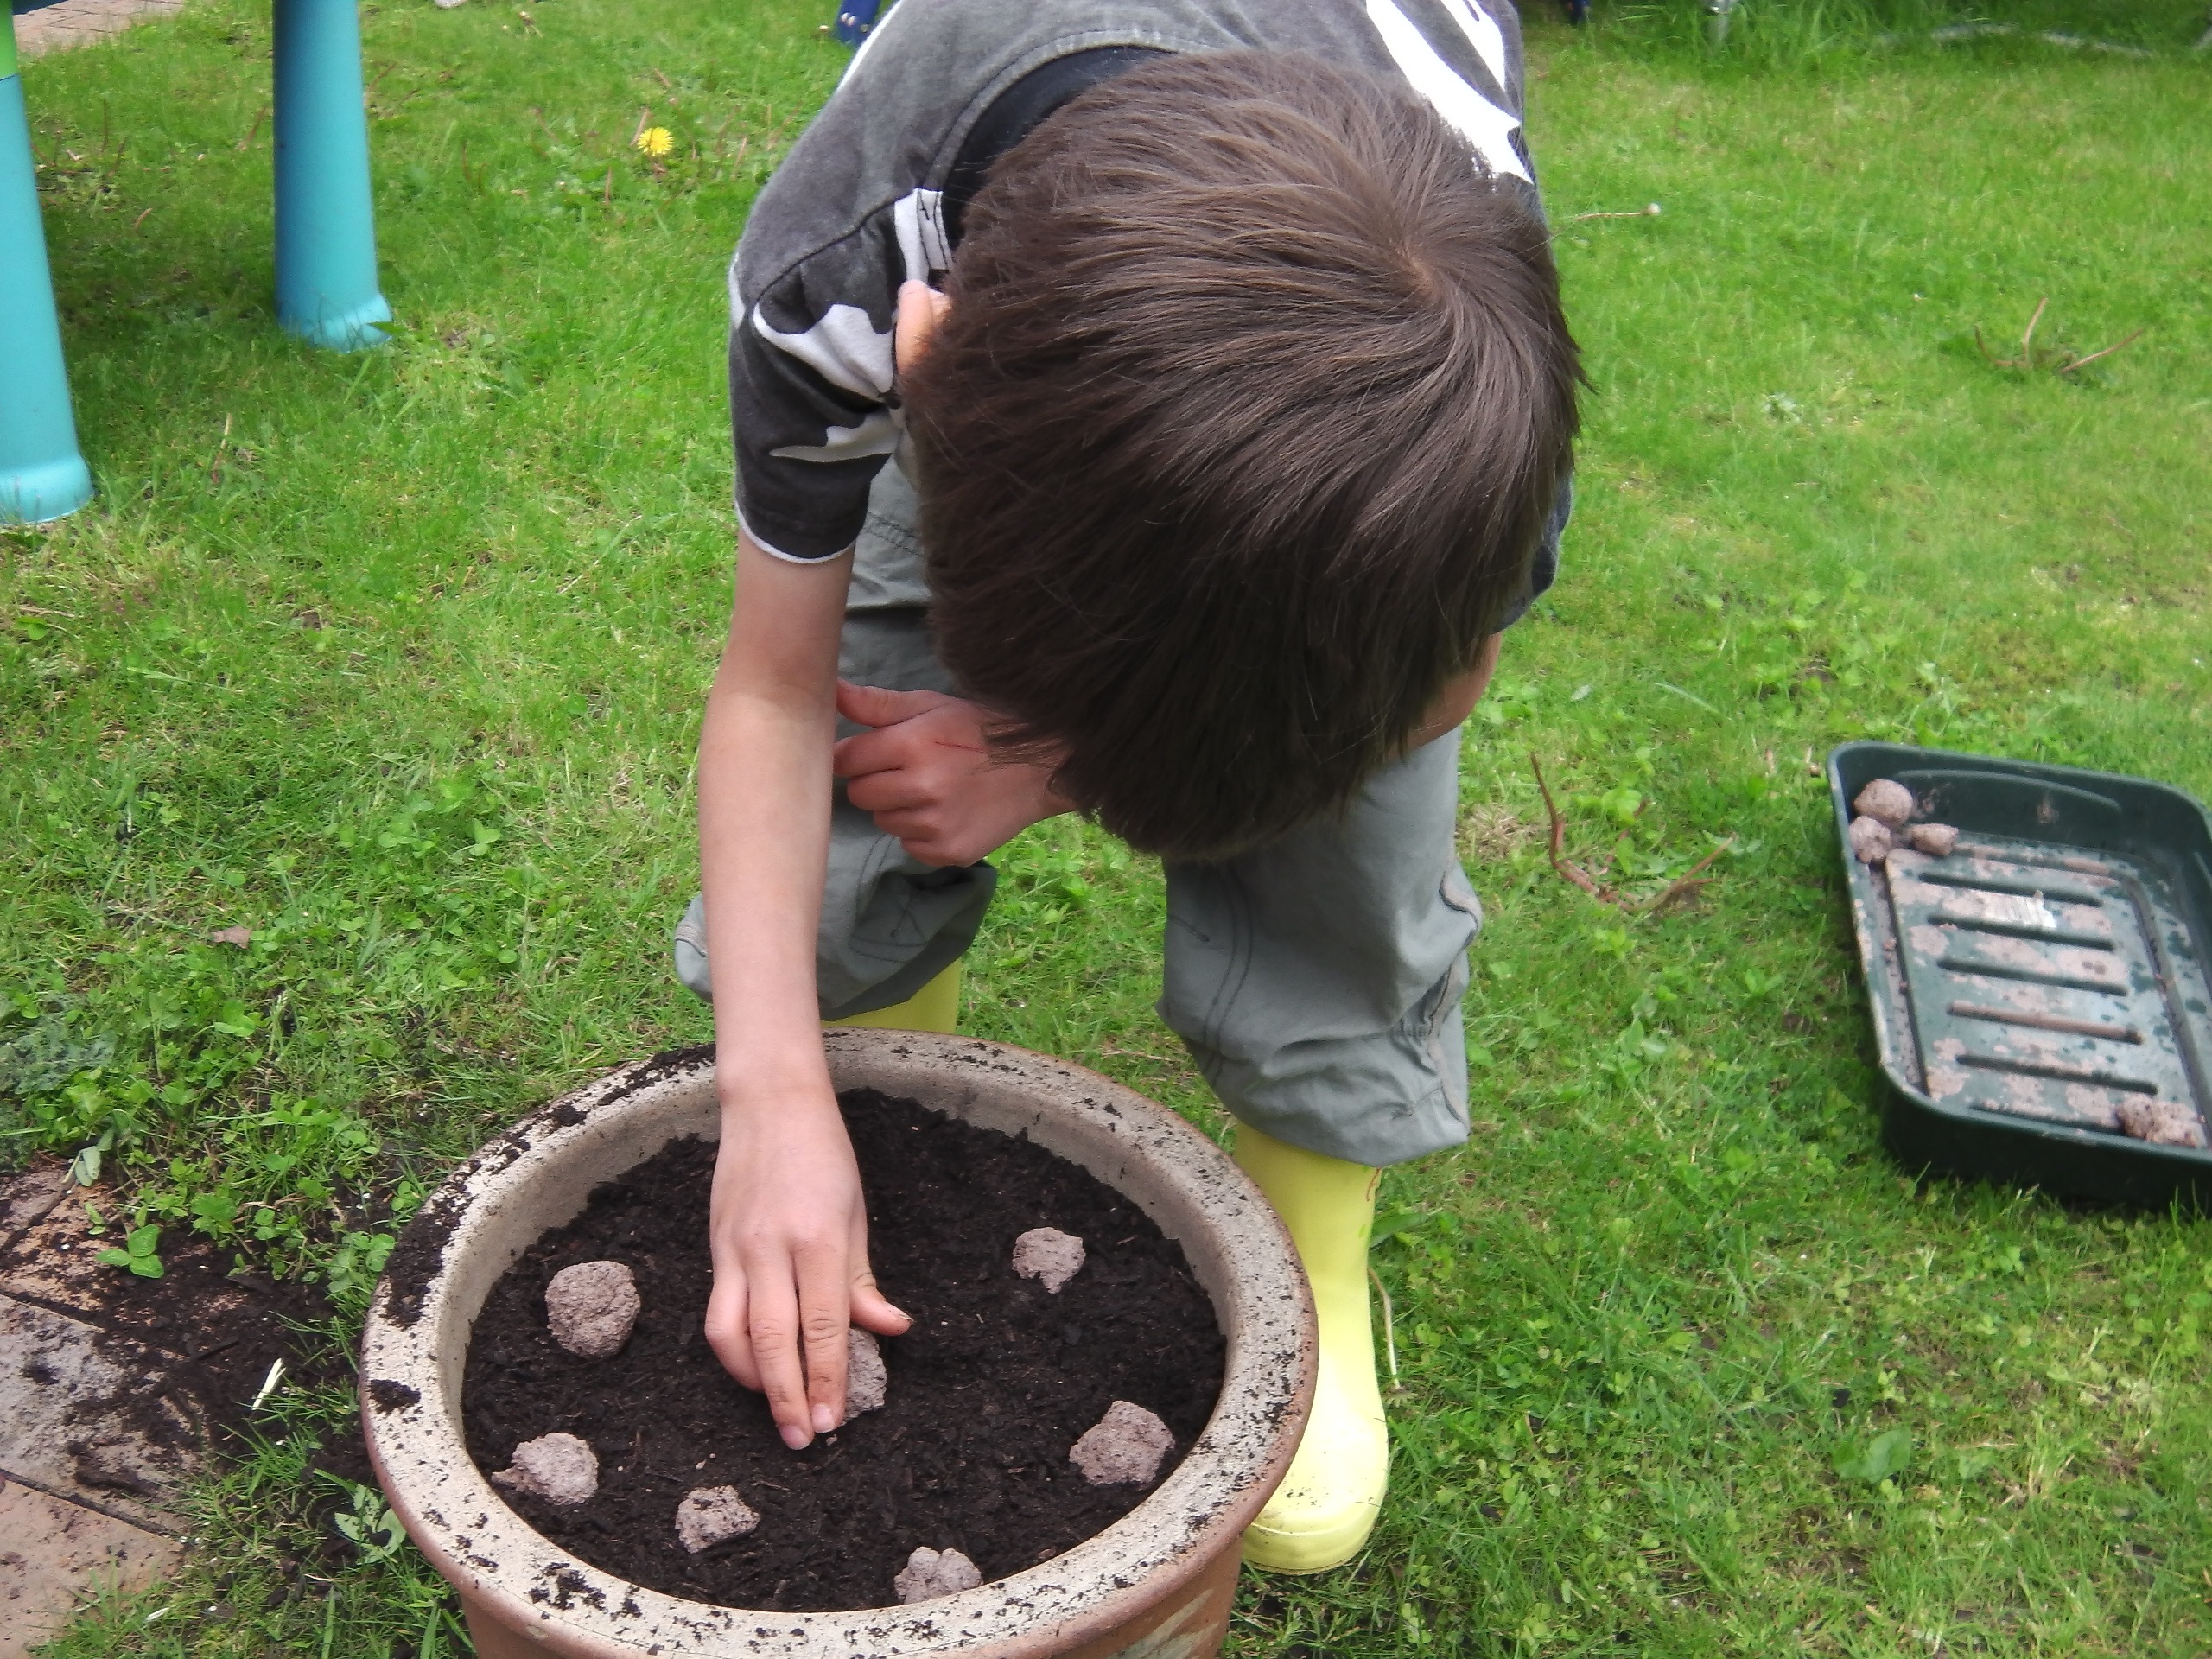 Scattering the seed balls. No need to bury them.